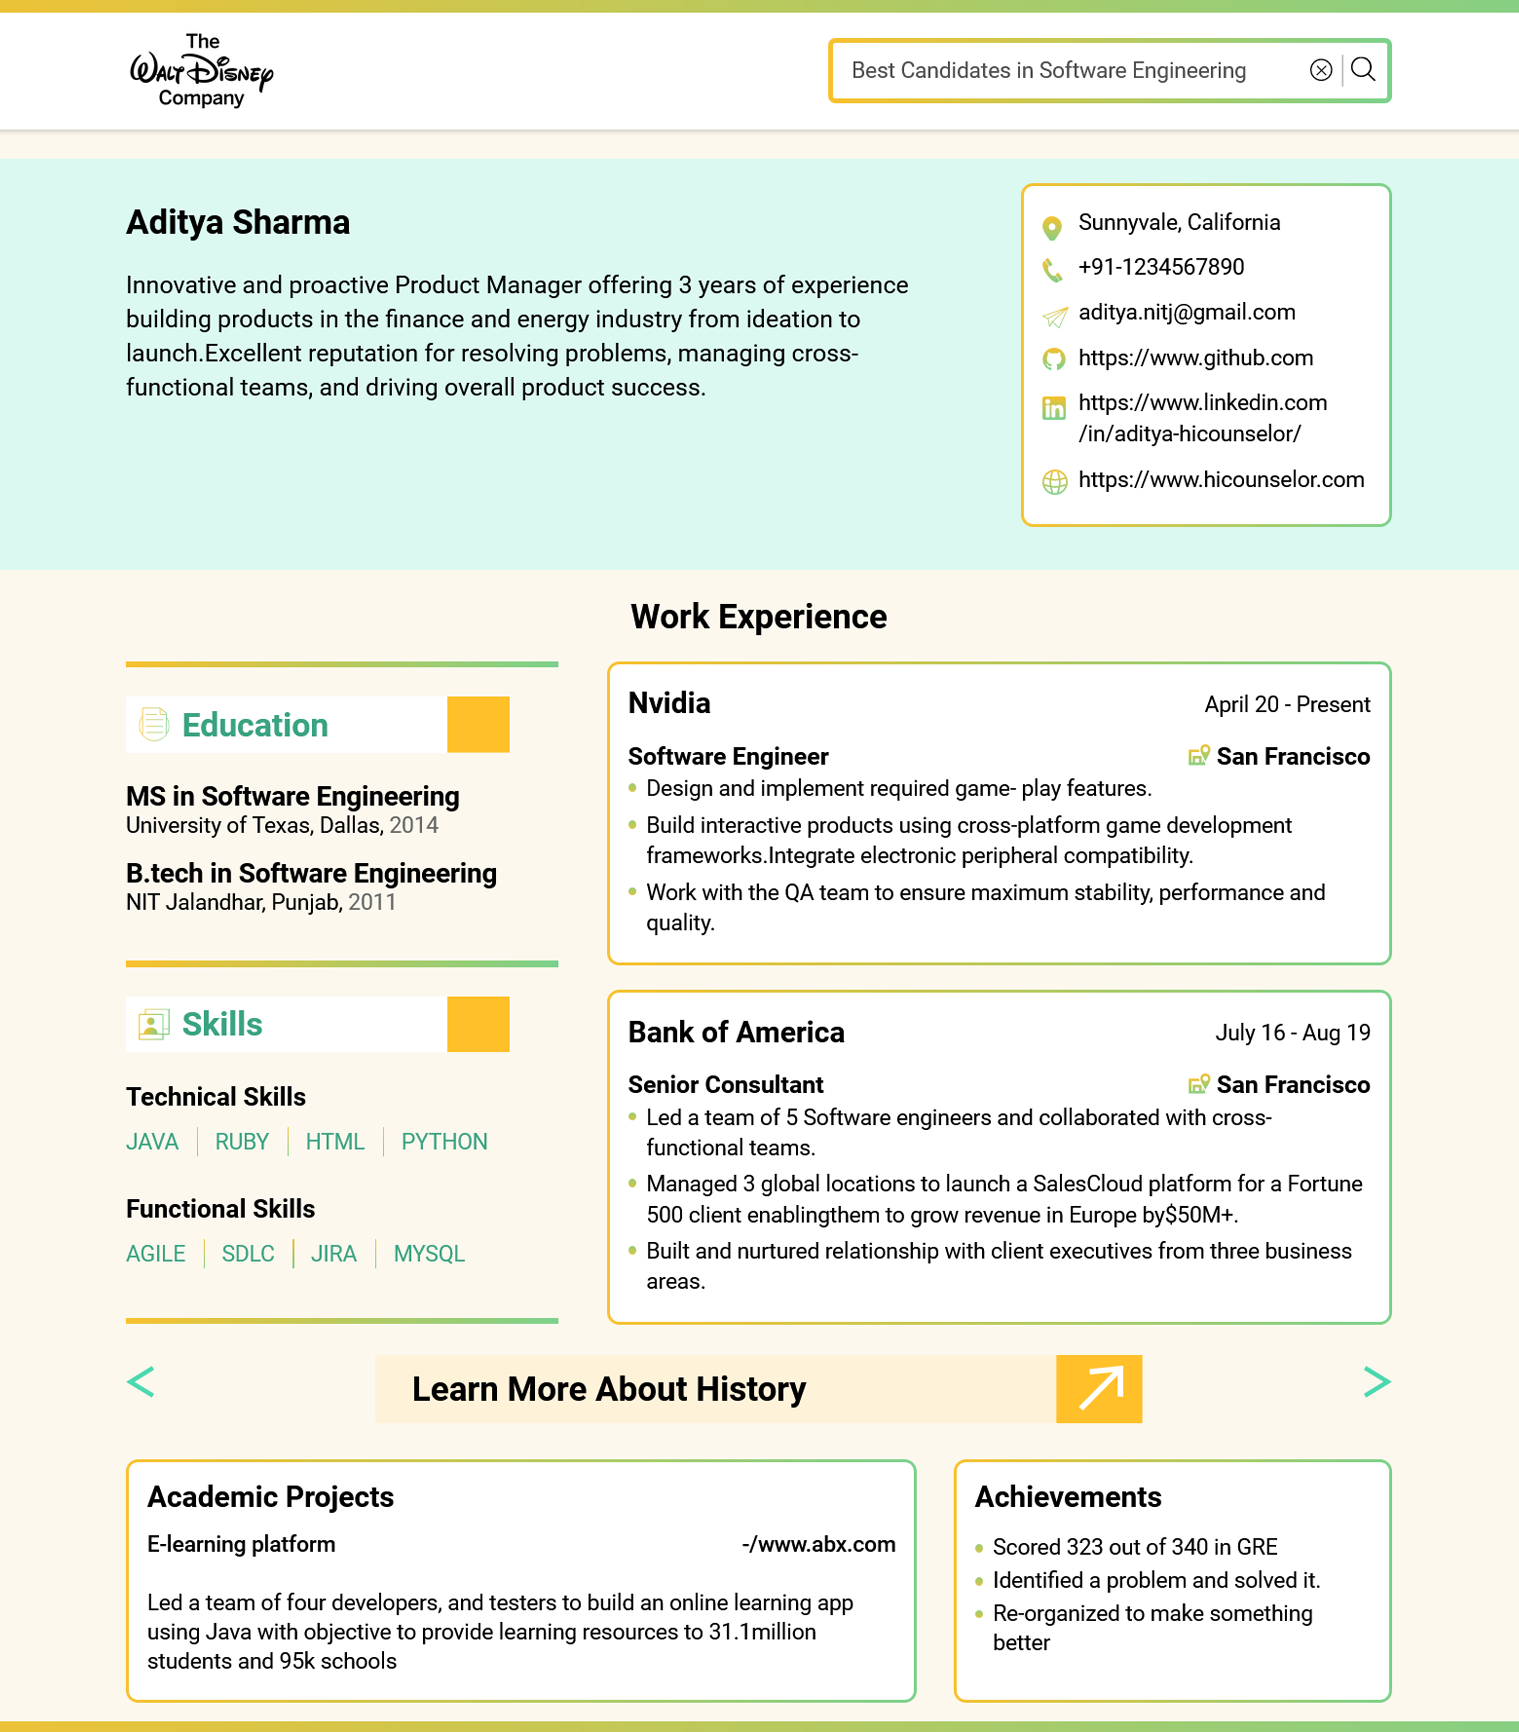 Check out this easy to use resume builder by HiCounselor